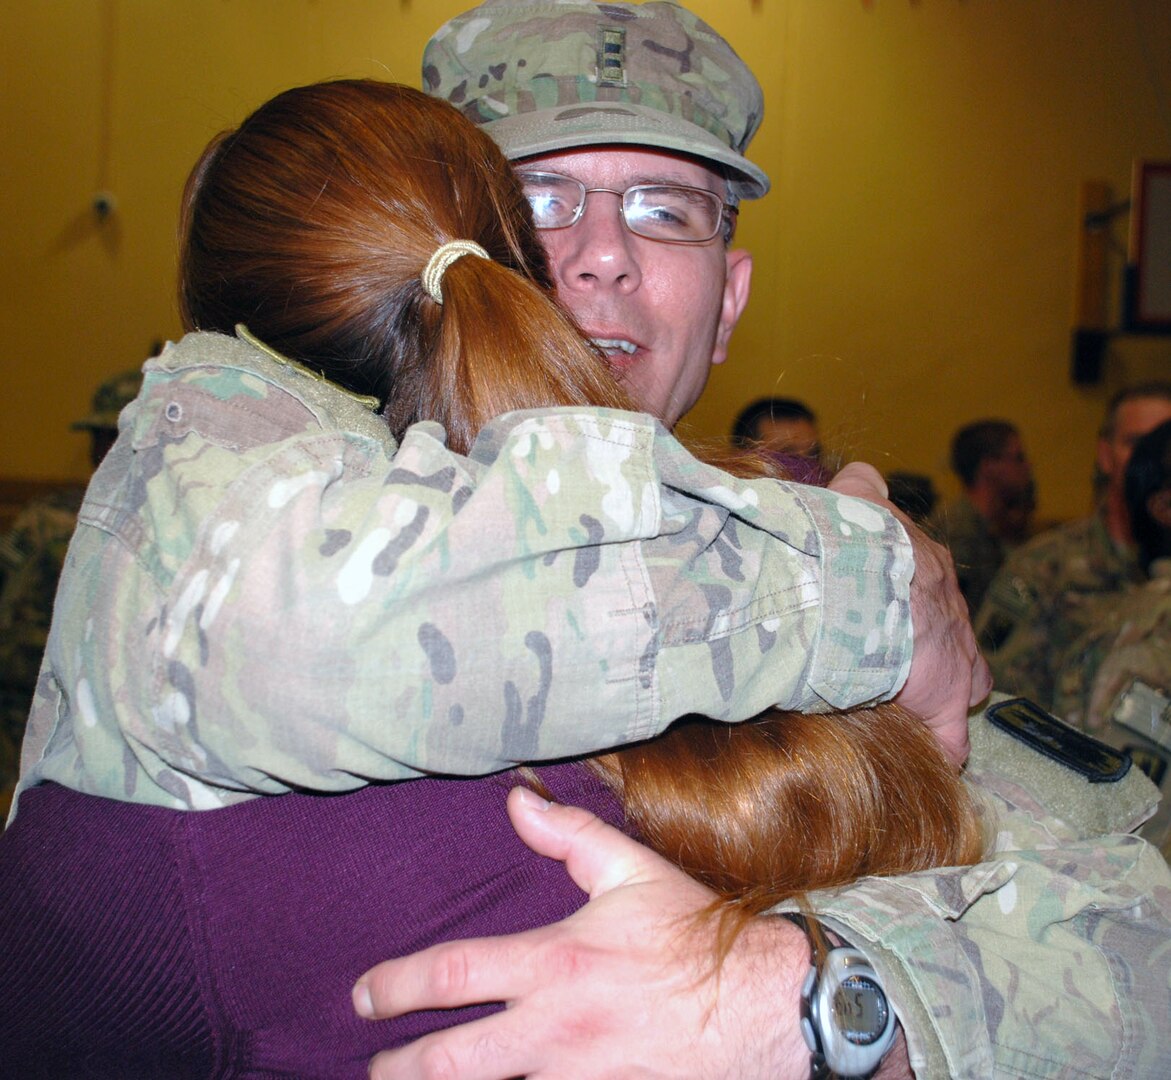 Family members greet Soldiers with hugs and kisses after the 14th Military Intelligence Battalion was dismissed. The Soldiers will have some reintegration training during their first week home, then have 30 days of leave before resuming their military duties.
Photo by Gregory Ripps